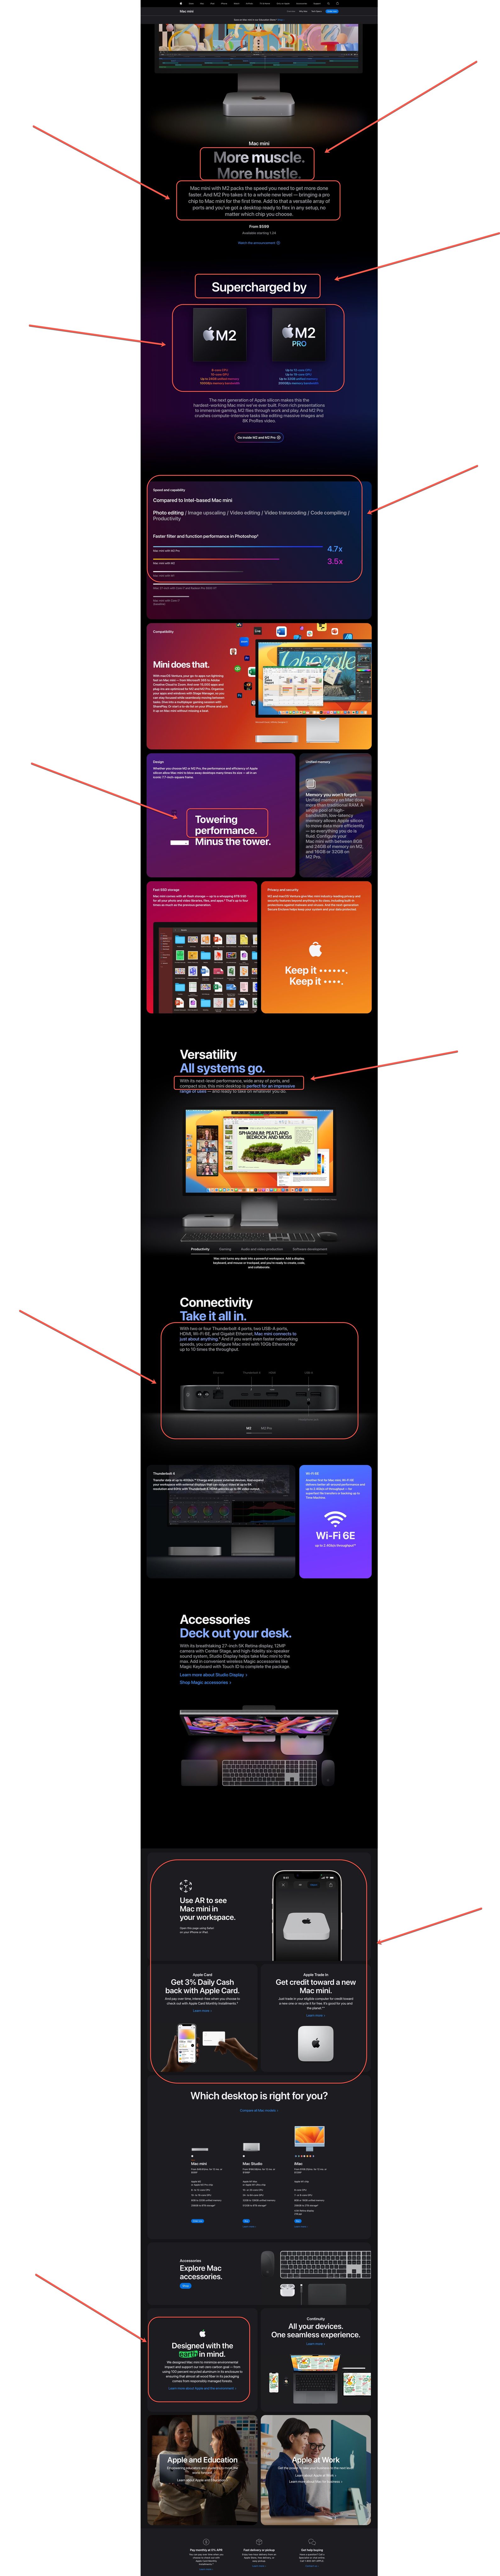 a screenshot of the Mac mini product page, with red arrows pointing to some sections.